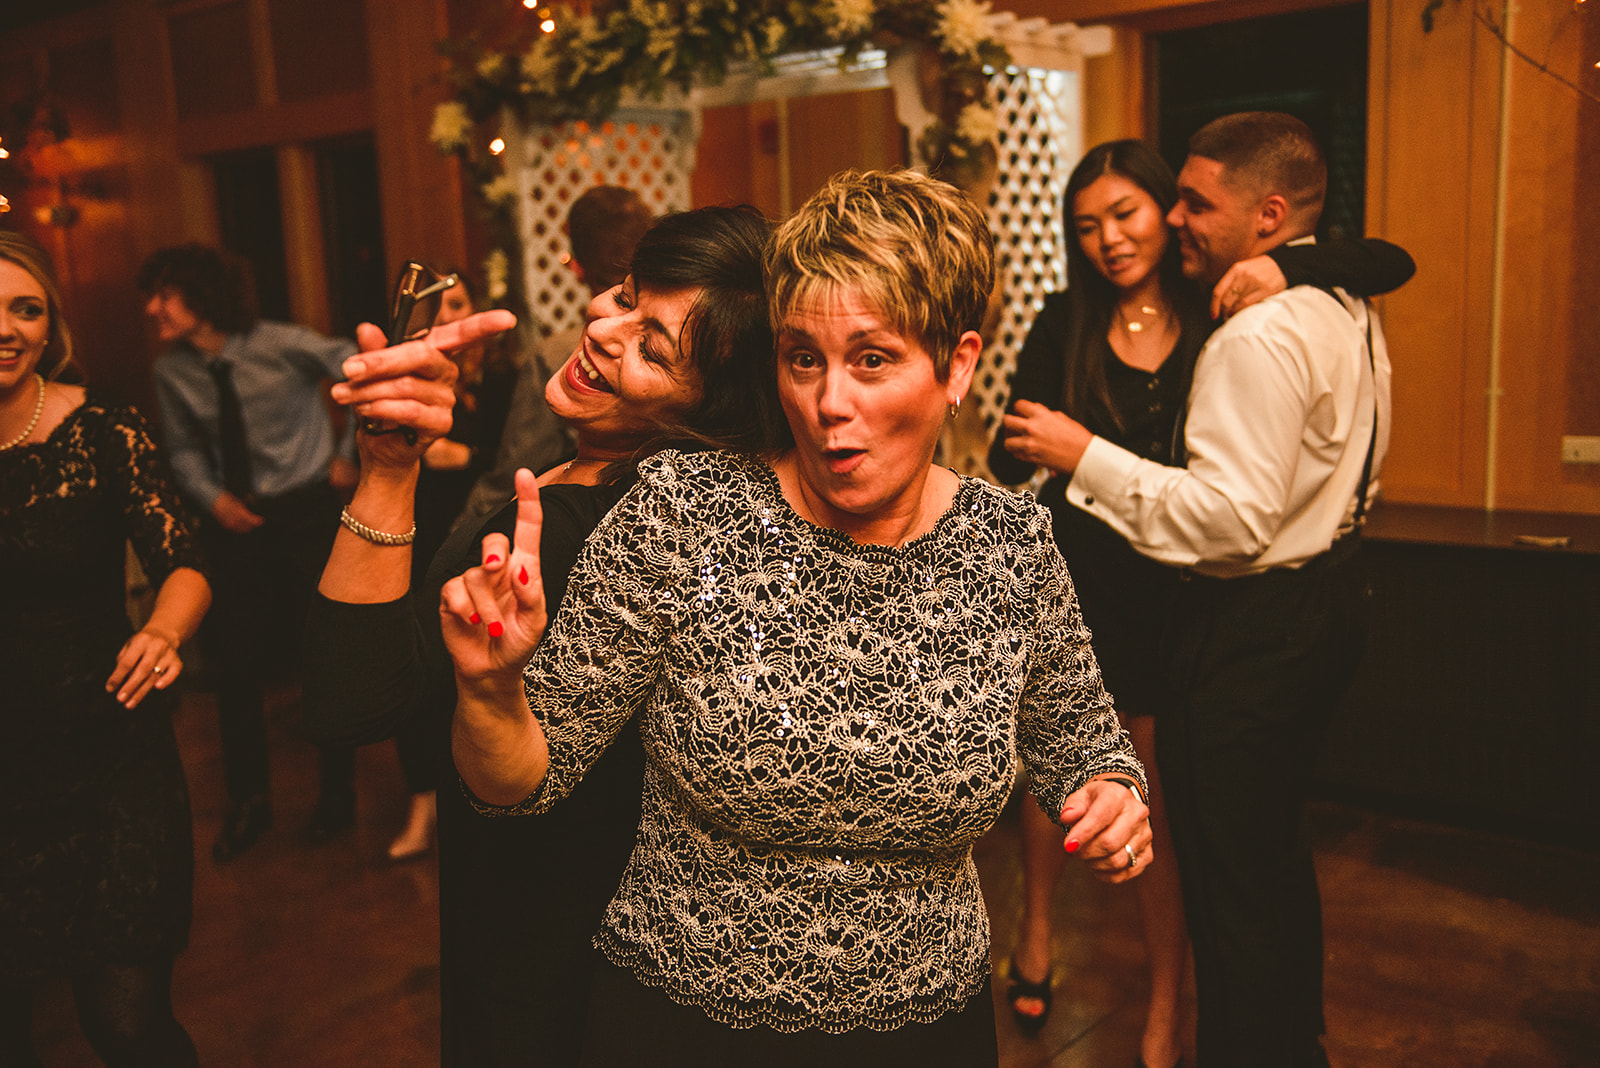 the mother of the bride dancing with her friends as the both laugh